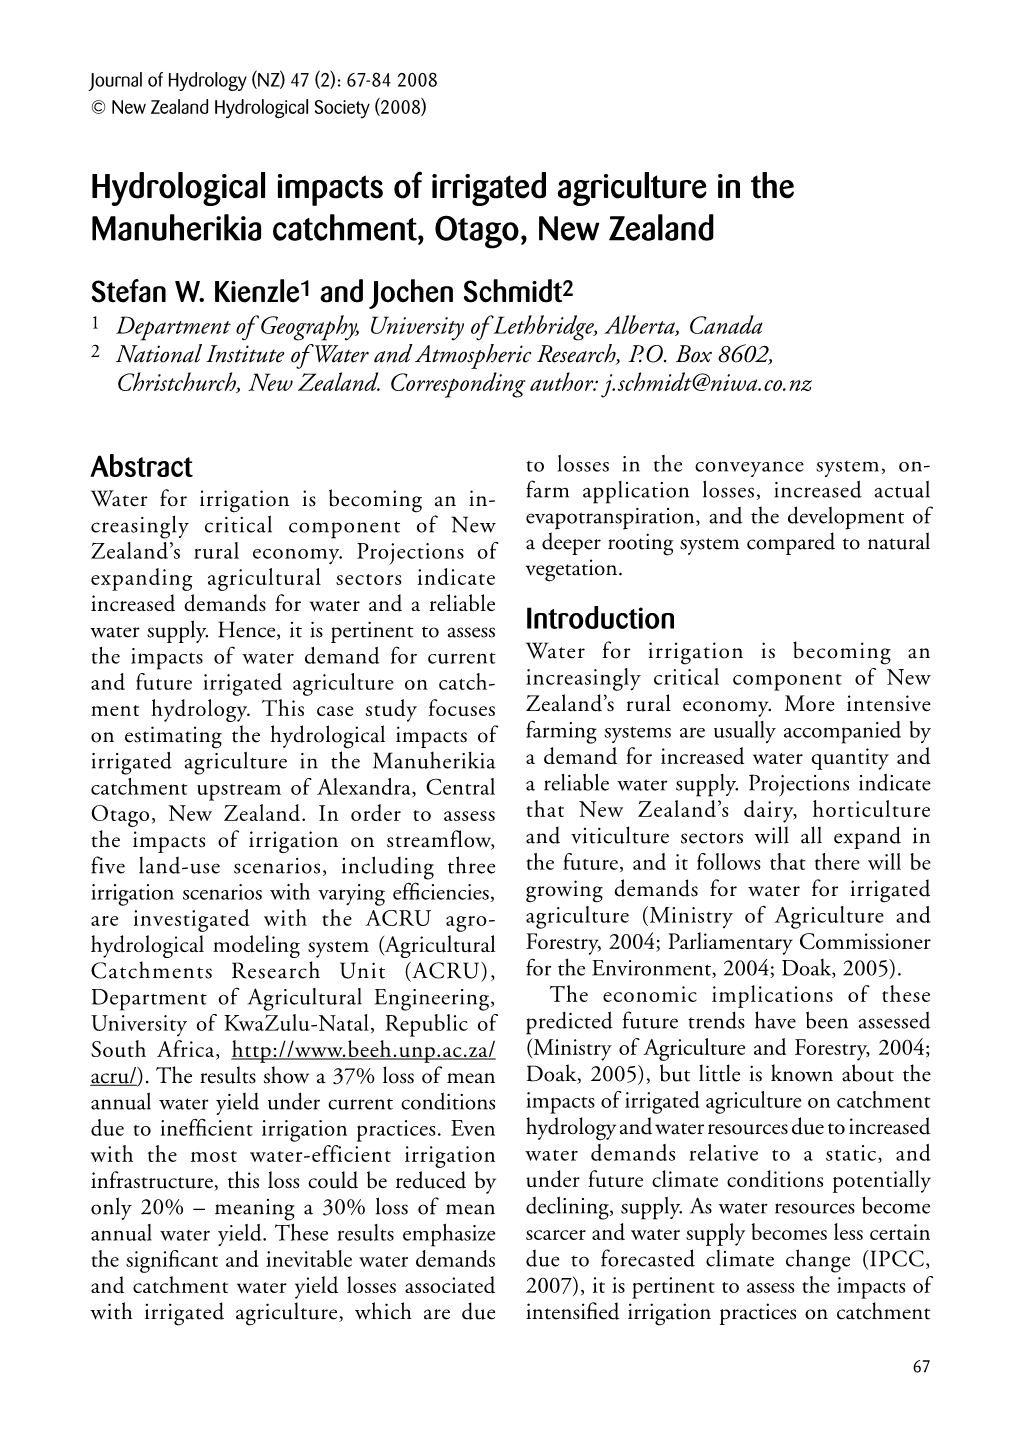 Hydrological Impacts of Irrigated Agriculture in the Manuherikia Catchment, Otago, New Zealand